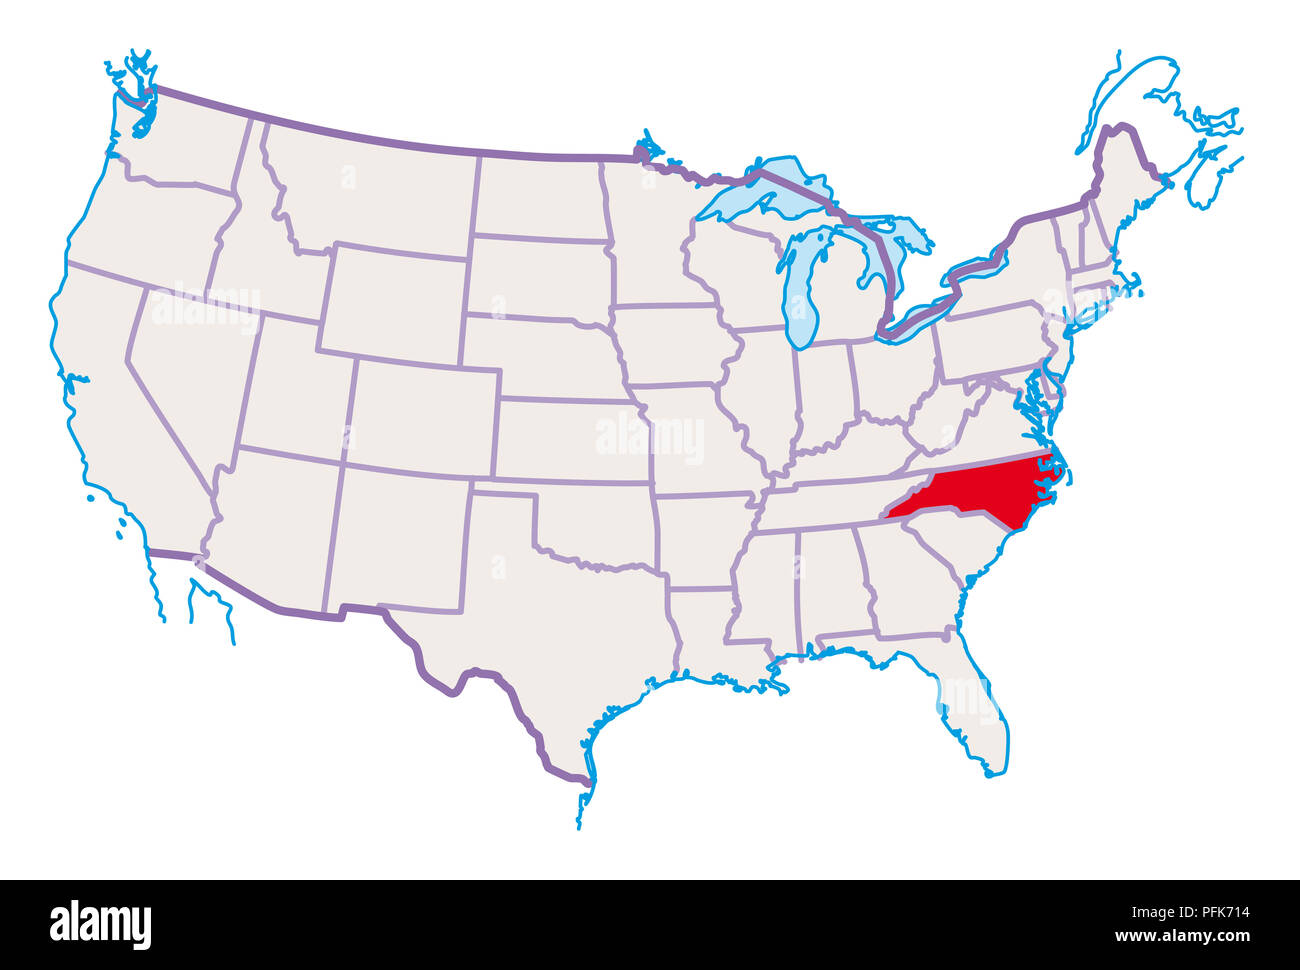 Map Of Usa North Carolina Highlighted In Red Stock Photo Alamy